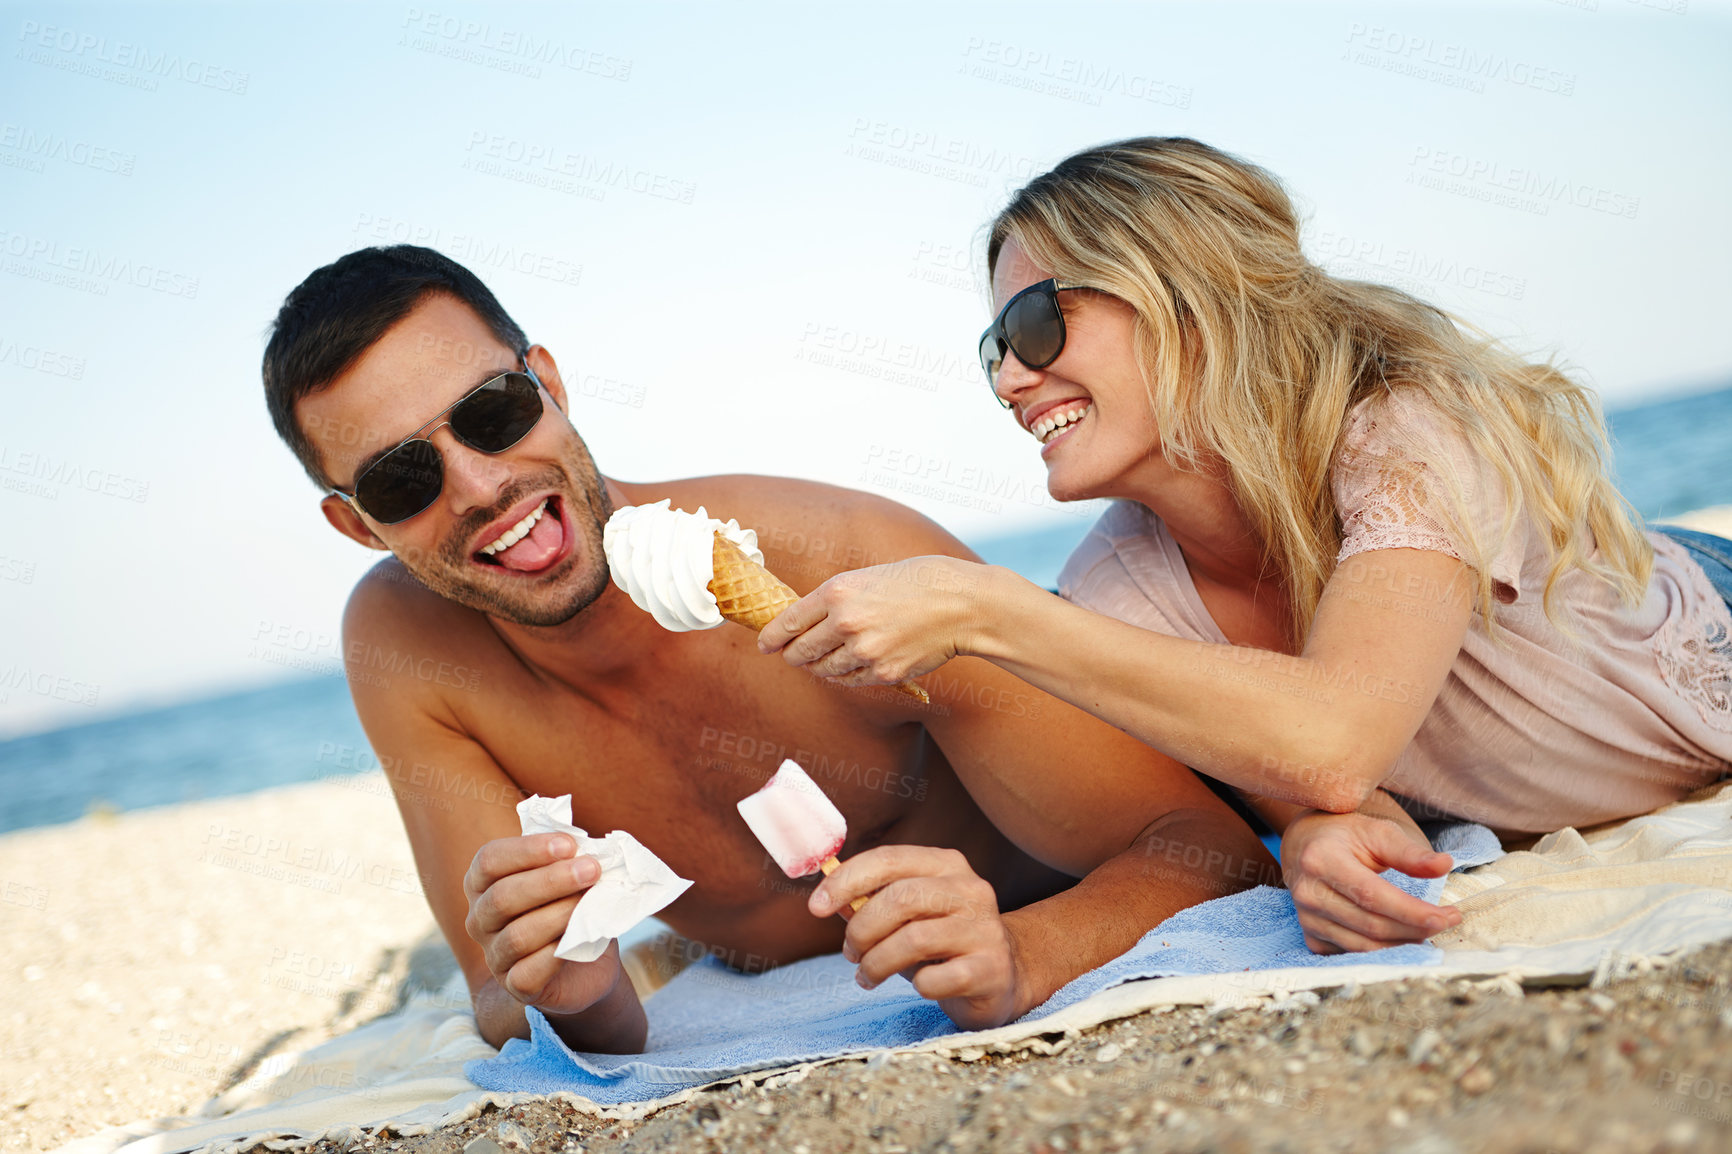 Buy stock photo Shot of a happy young couple eating ice cream while lying on a sunny beach